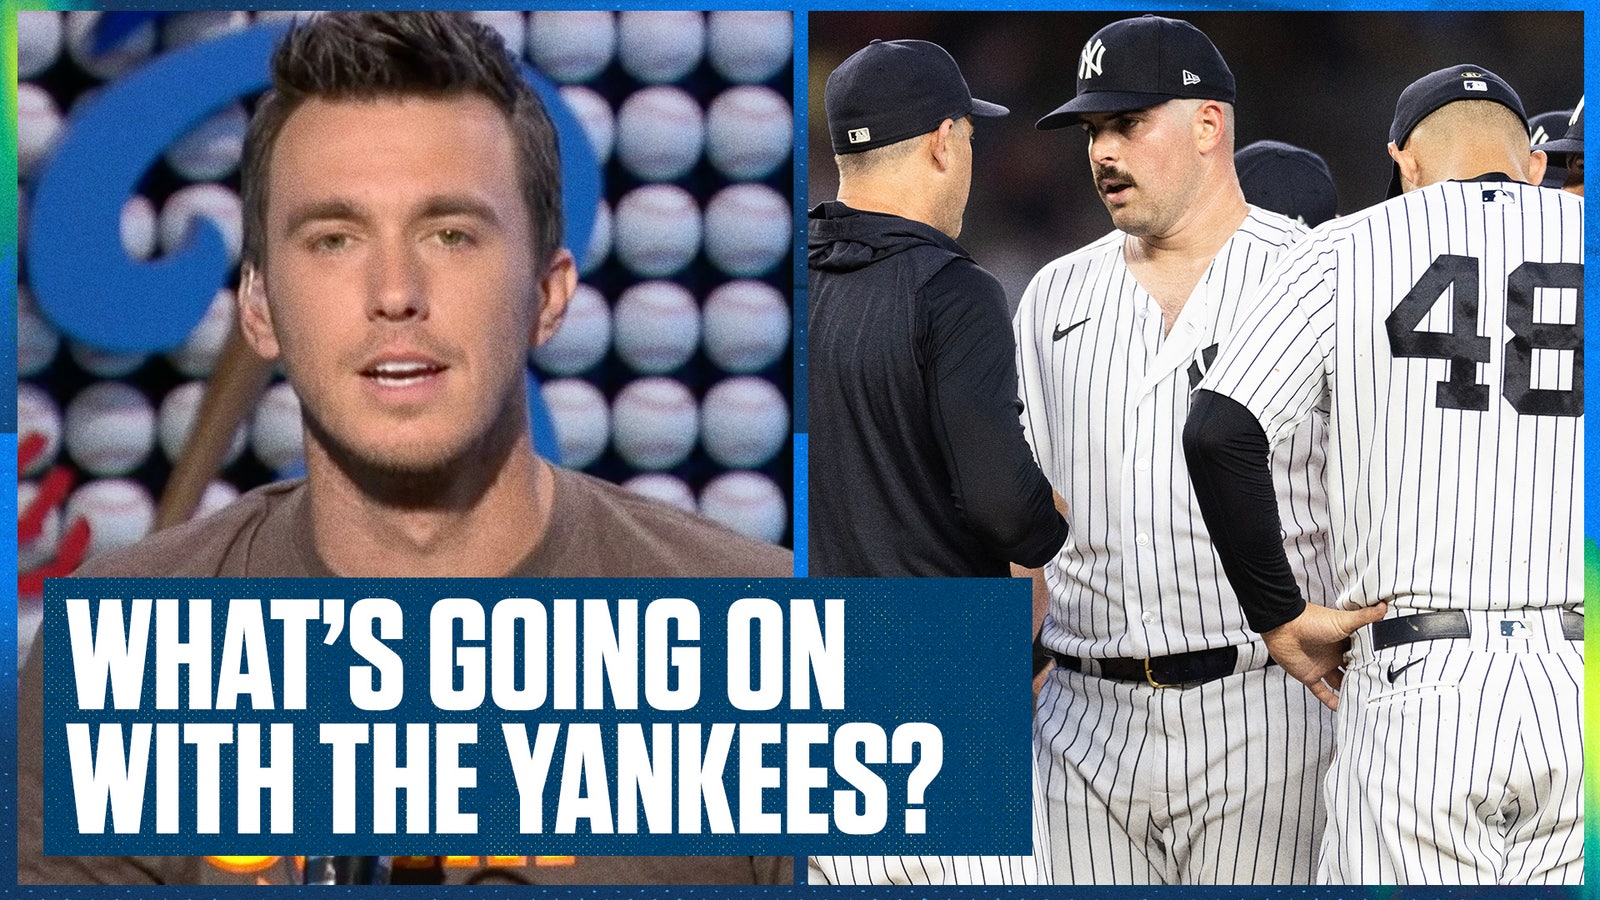 What is happening with the Yankees?